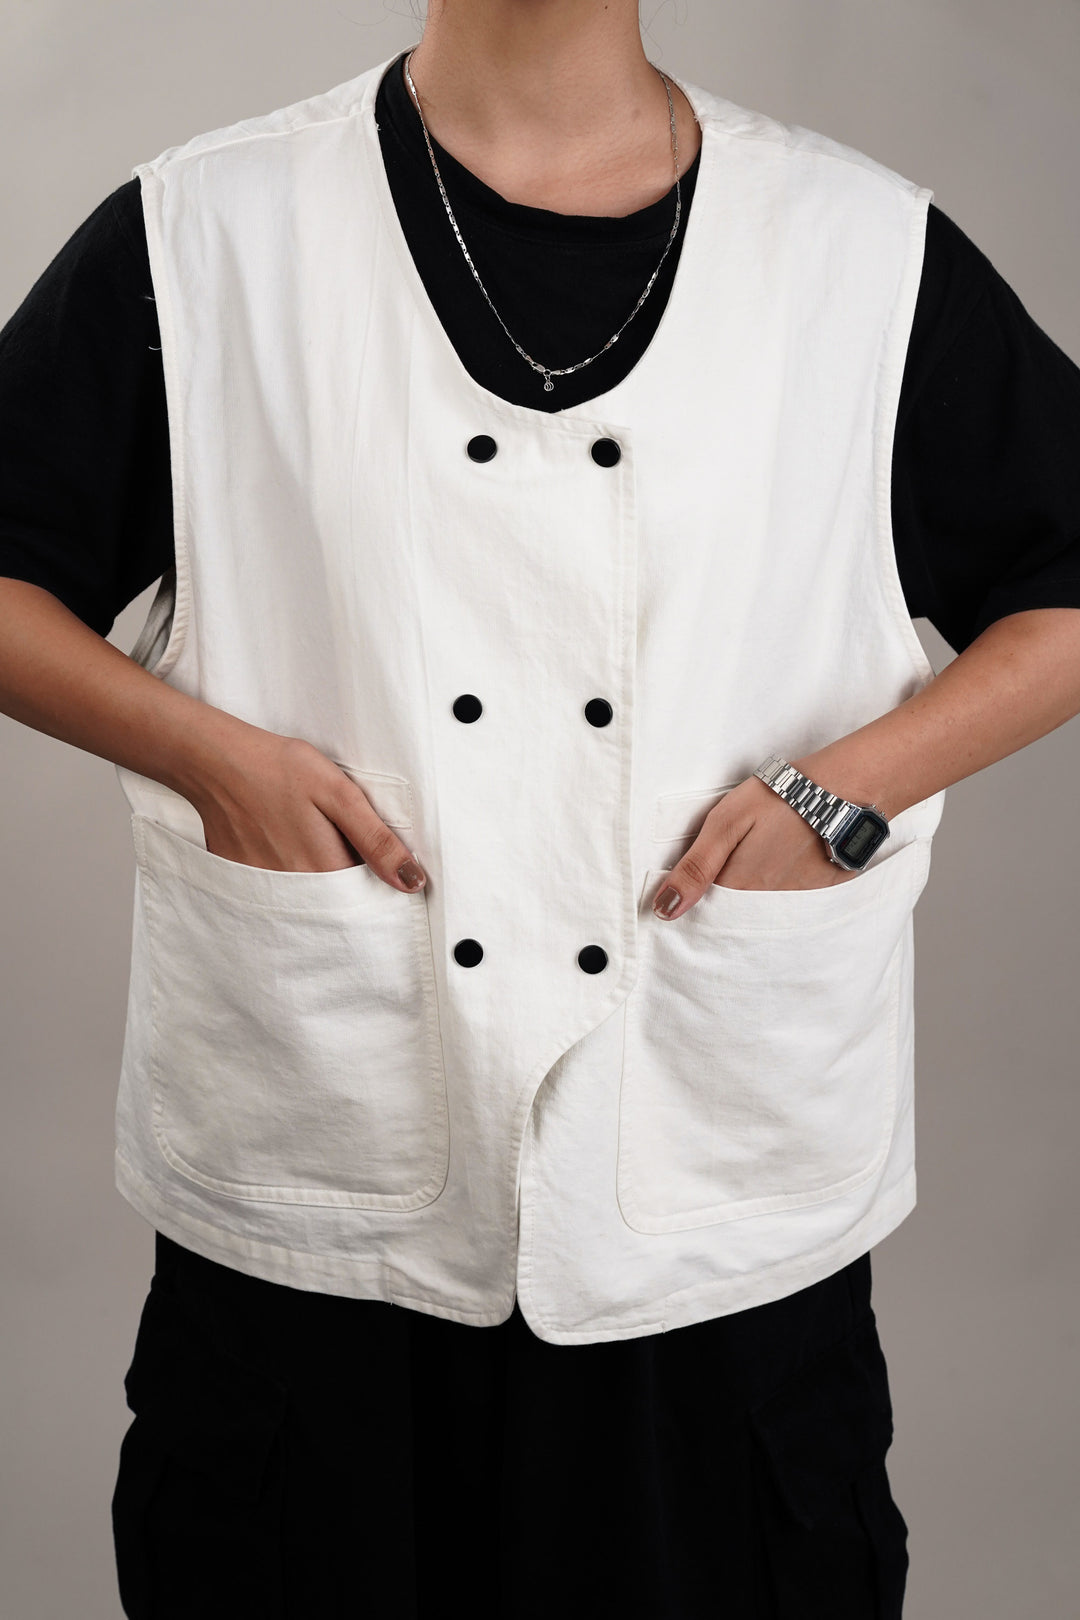 Women's double-breasted vest summer fashion